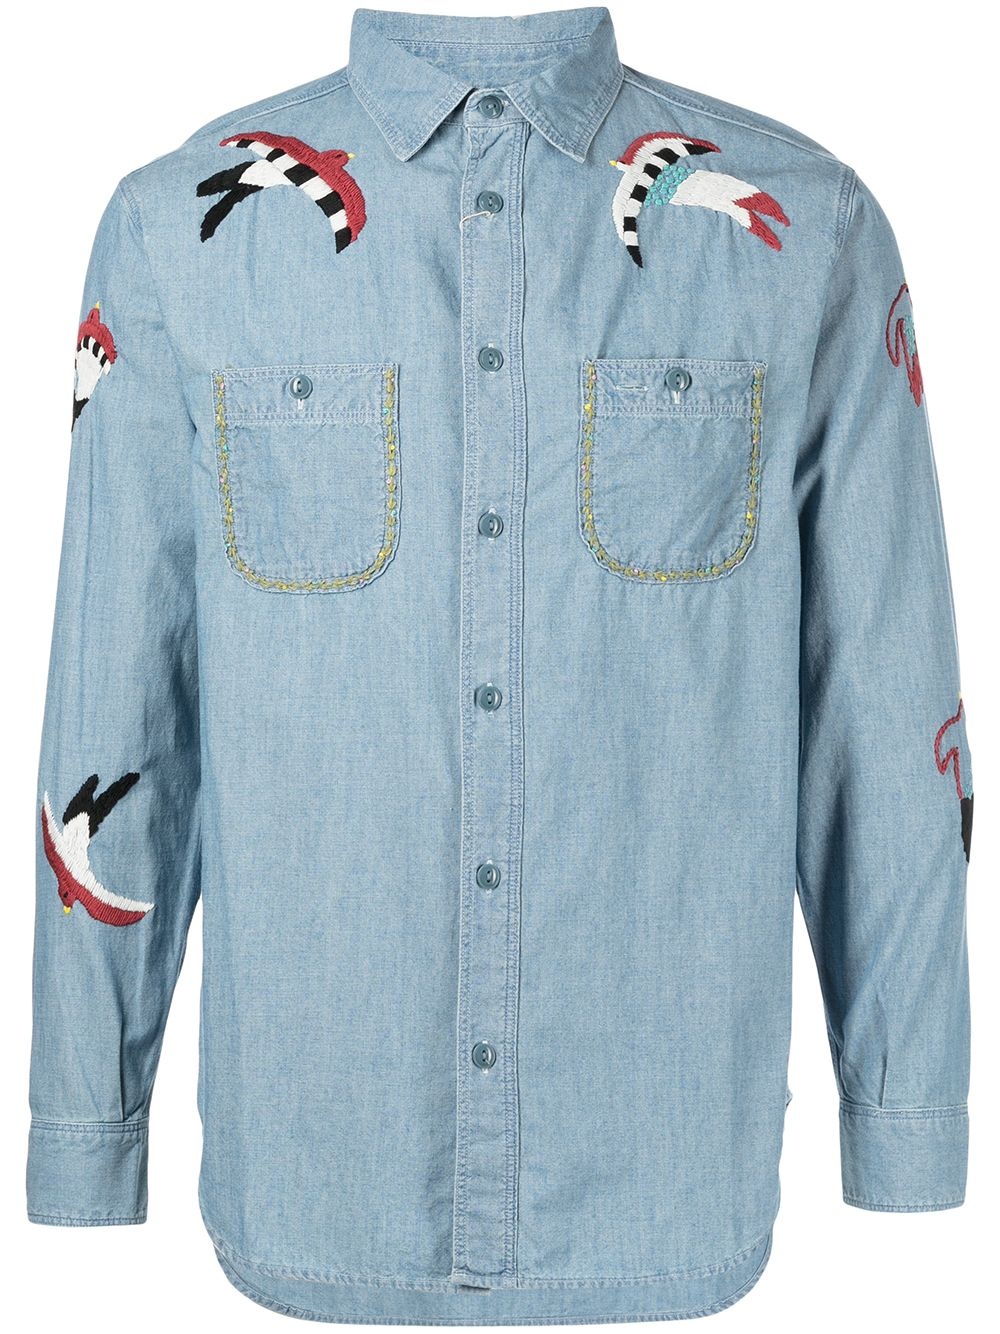 swallow-embroidered work shirt - 1